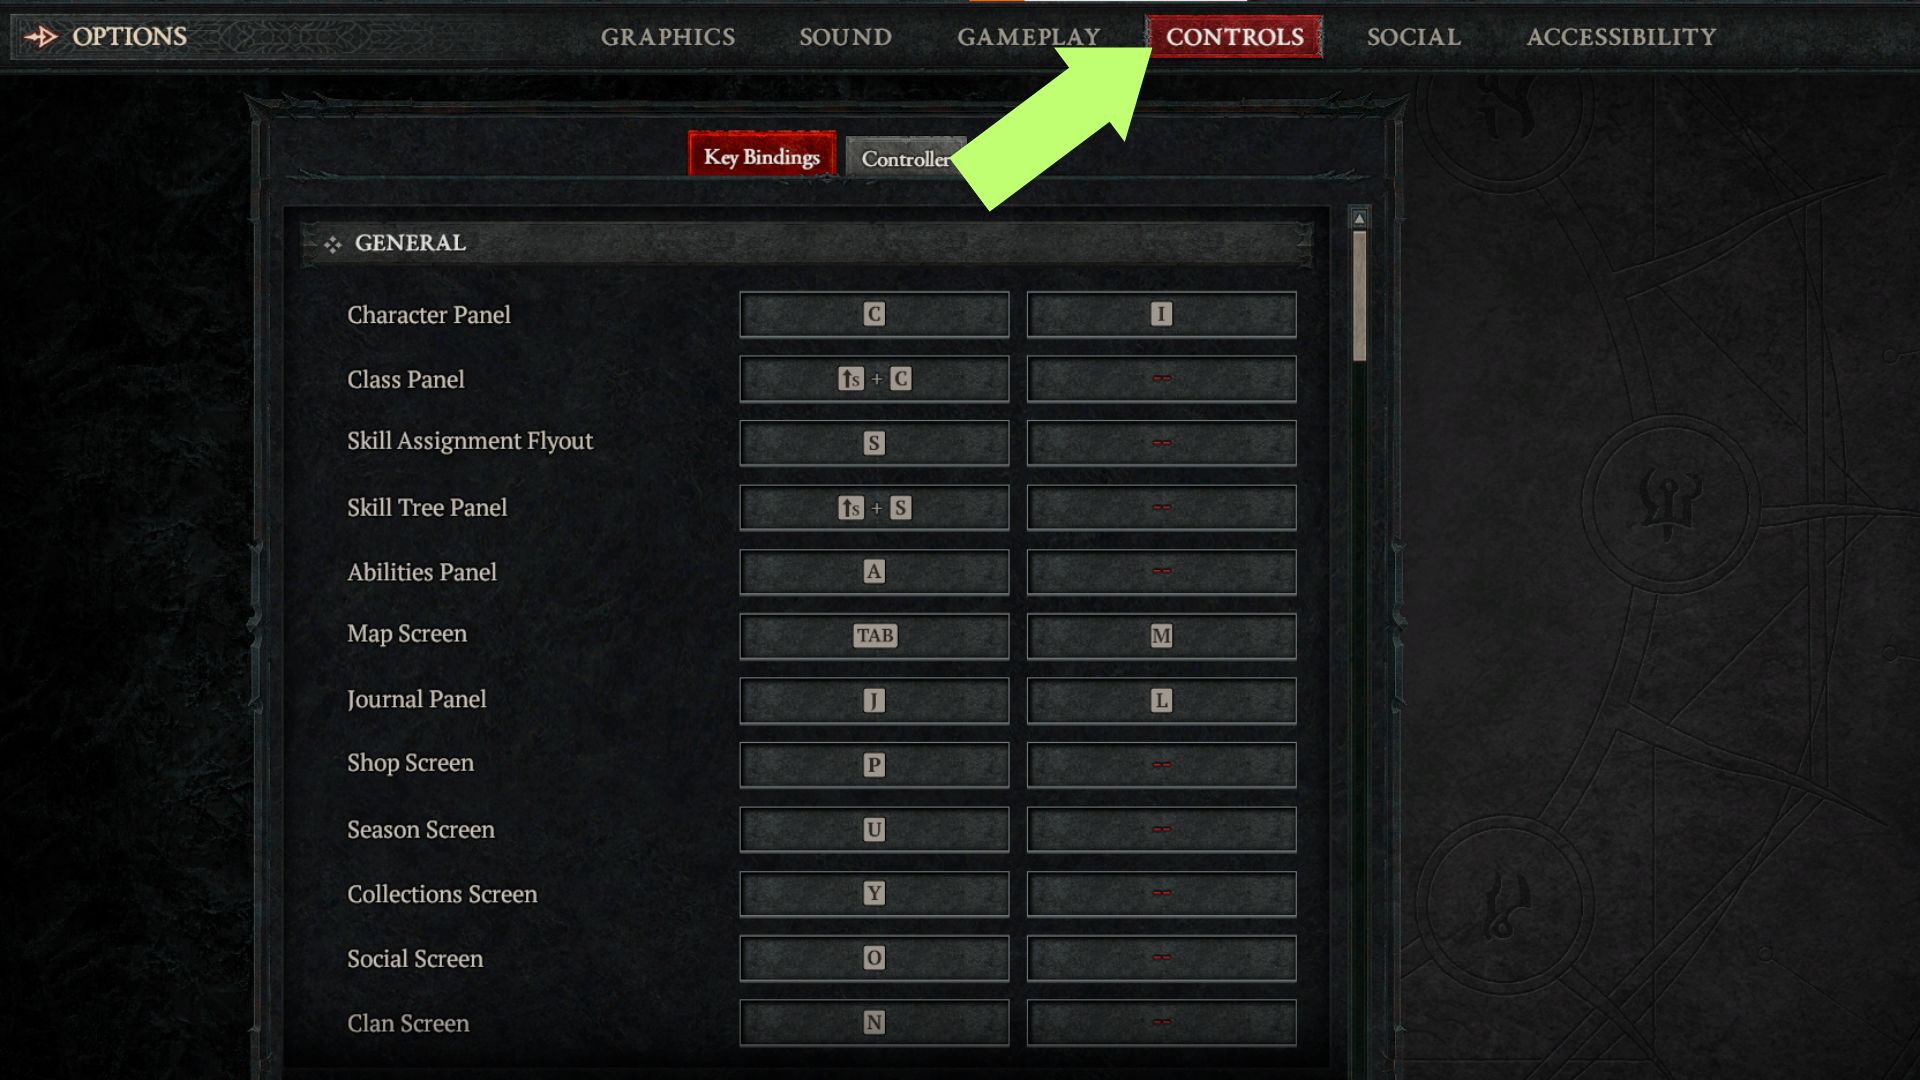 Navigate to the Controls section in the settings menu to turn off controller vibrations in Diablo IV. 